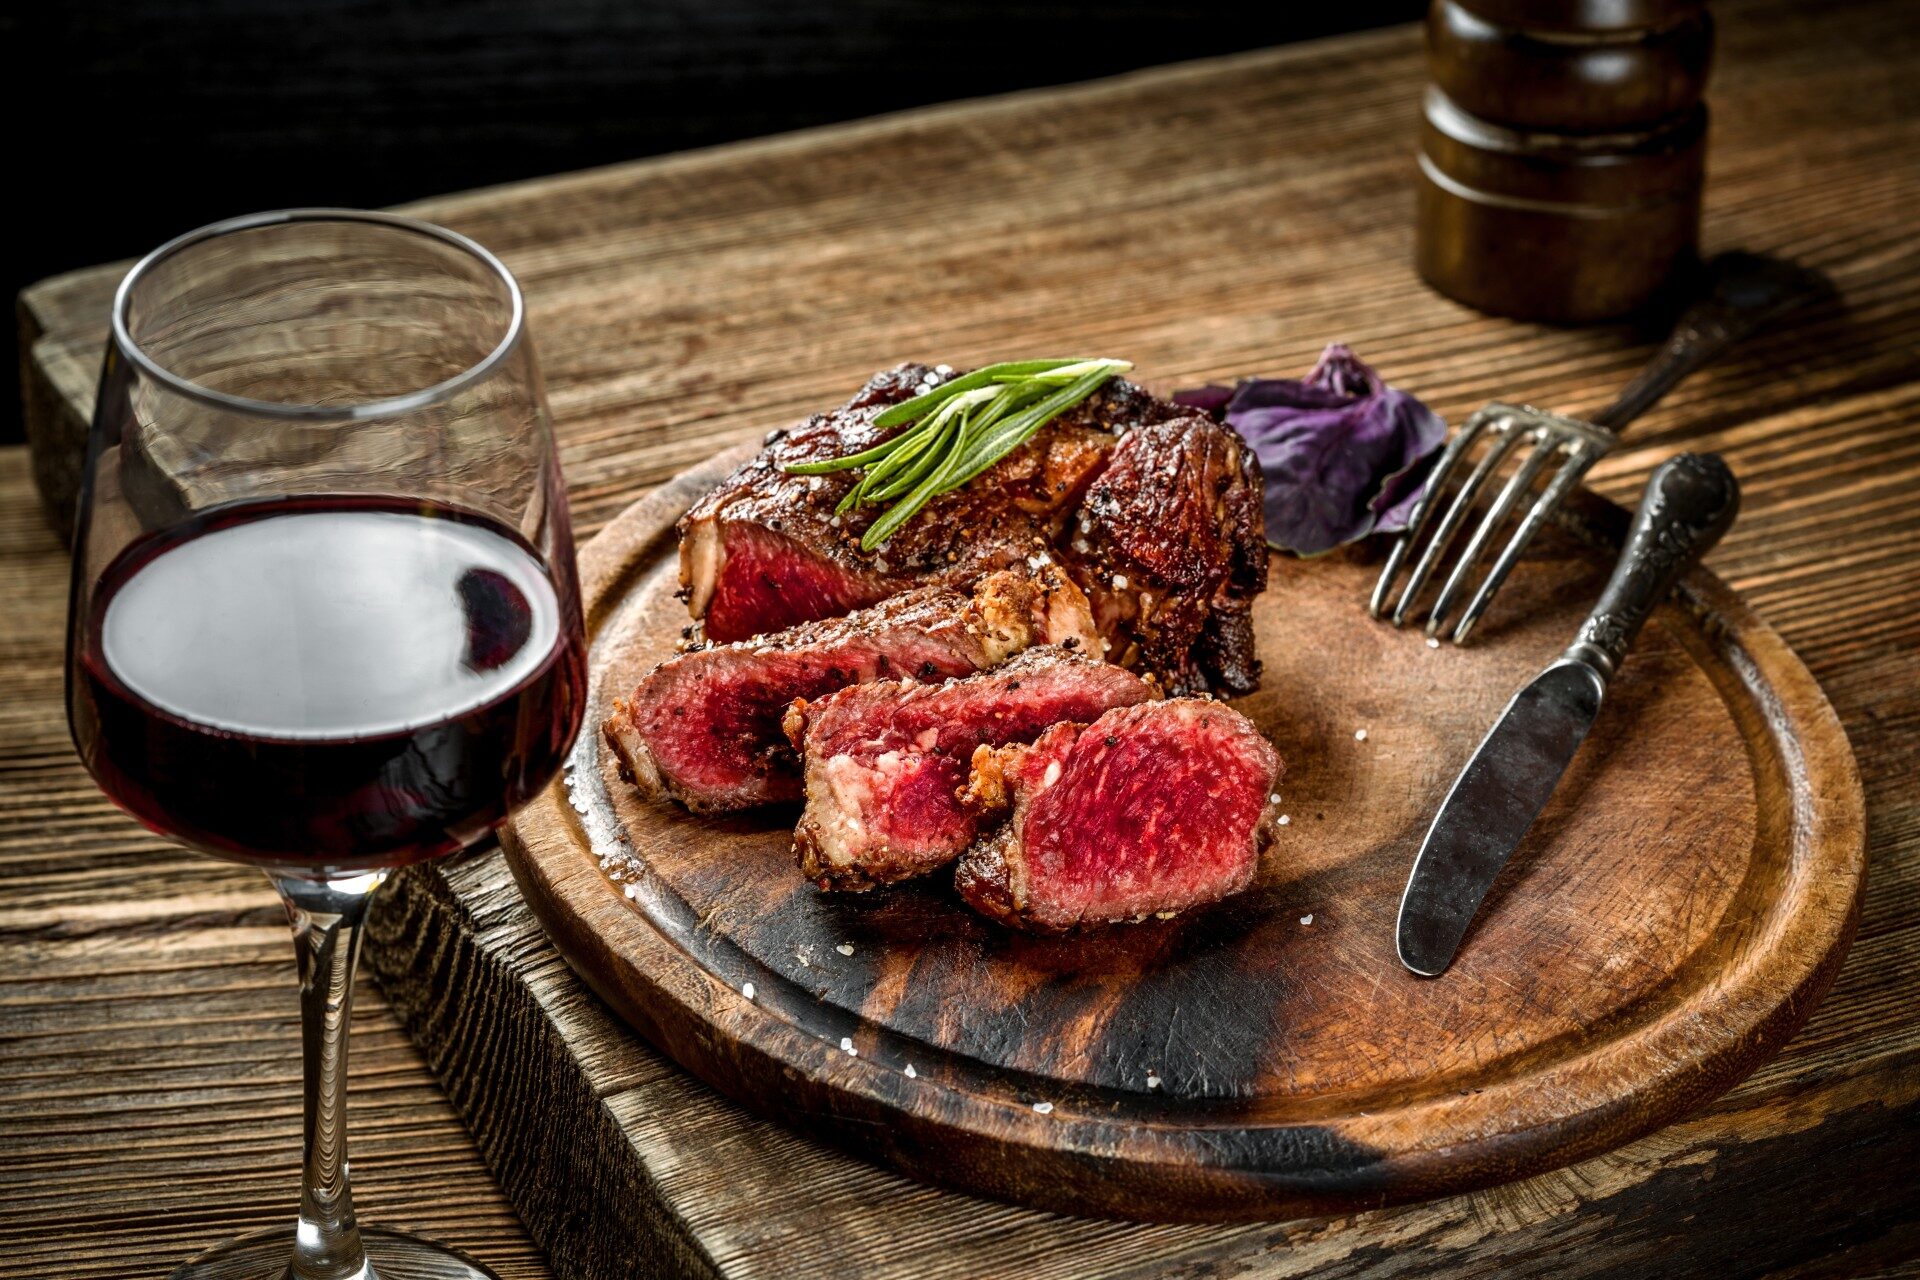 Add Some Sizzle to Your Next Dinner Party with This Mouth-watering Combination of Red Wine Jus and Steak.